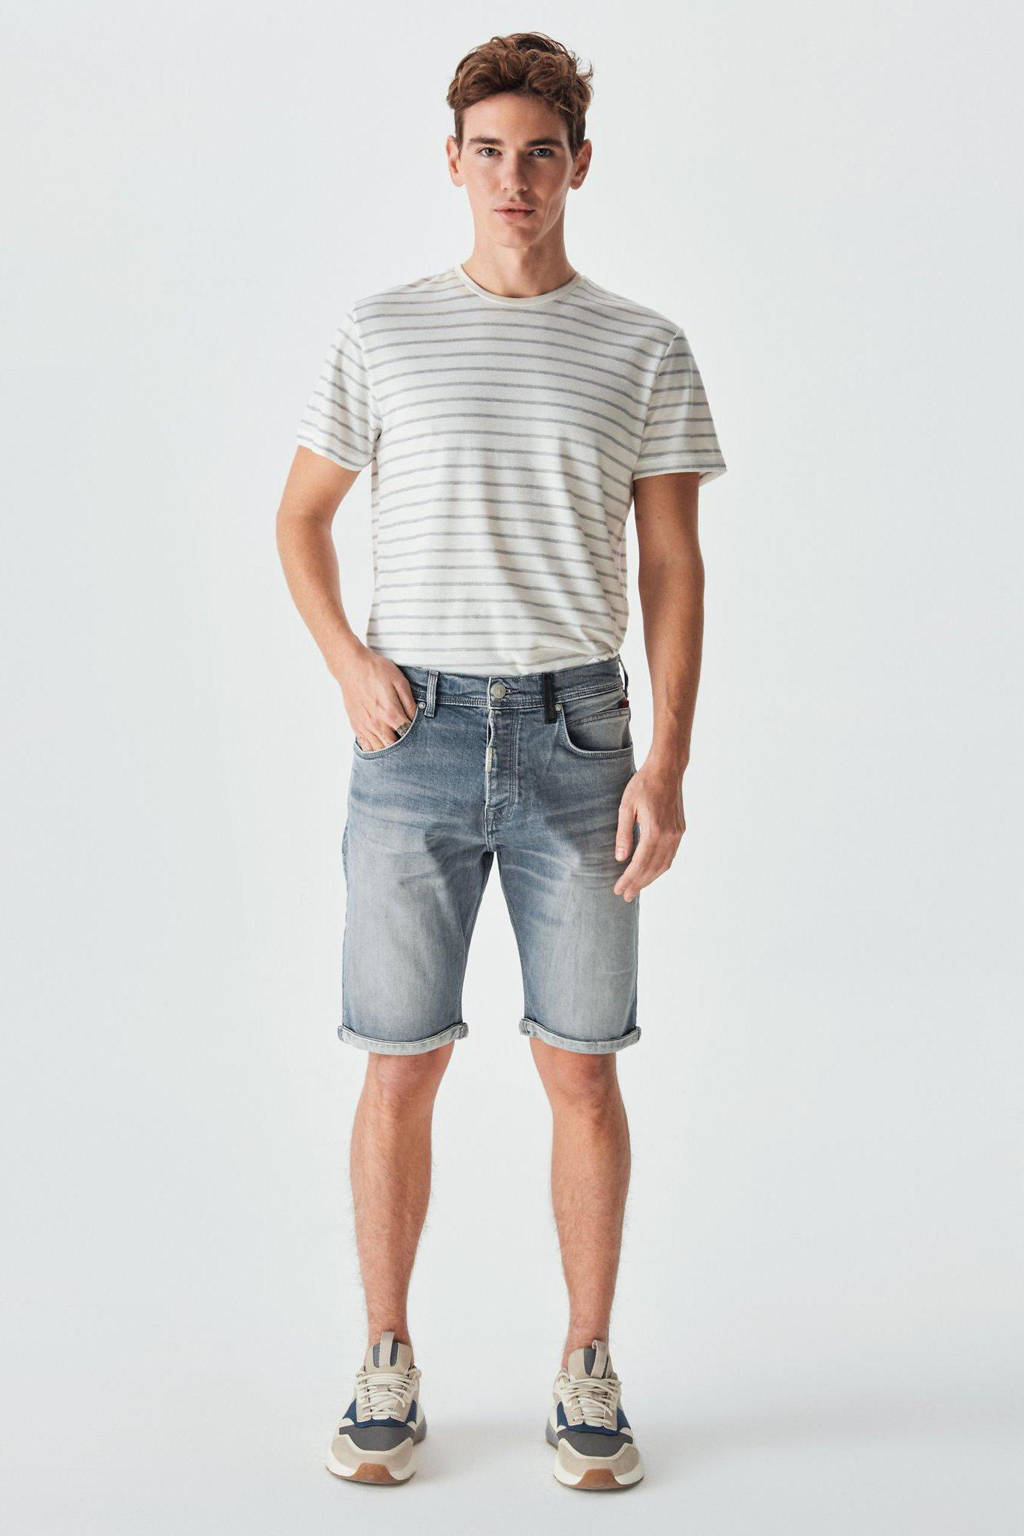 LTB regular fit jeans short Corvin timo wash, Timo wash